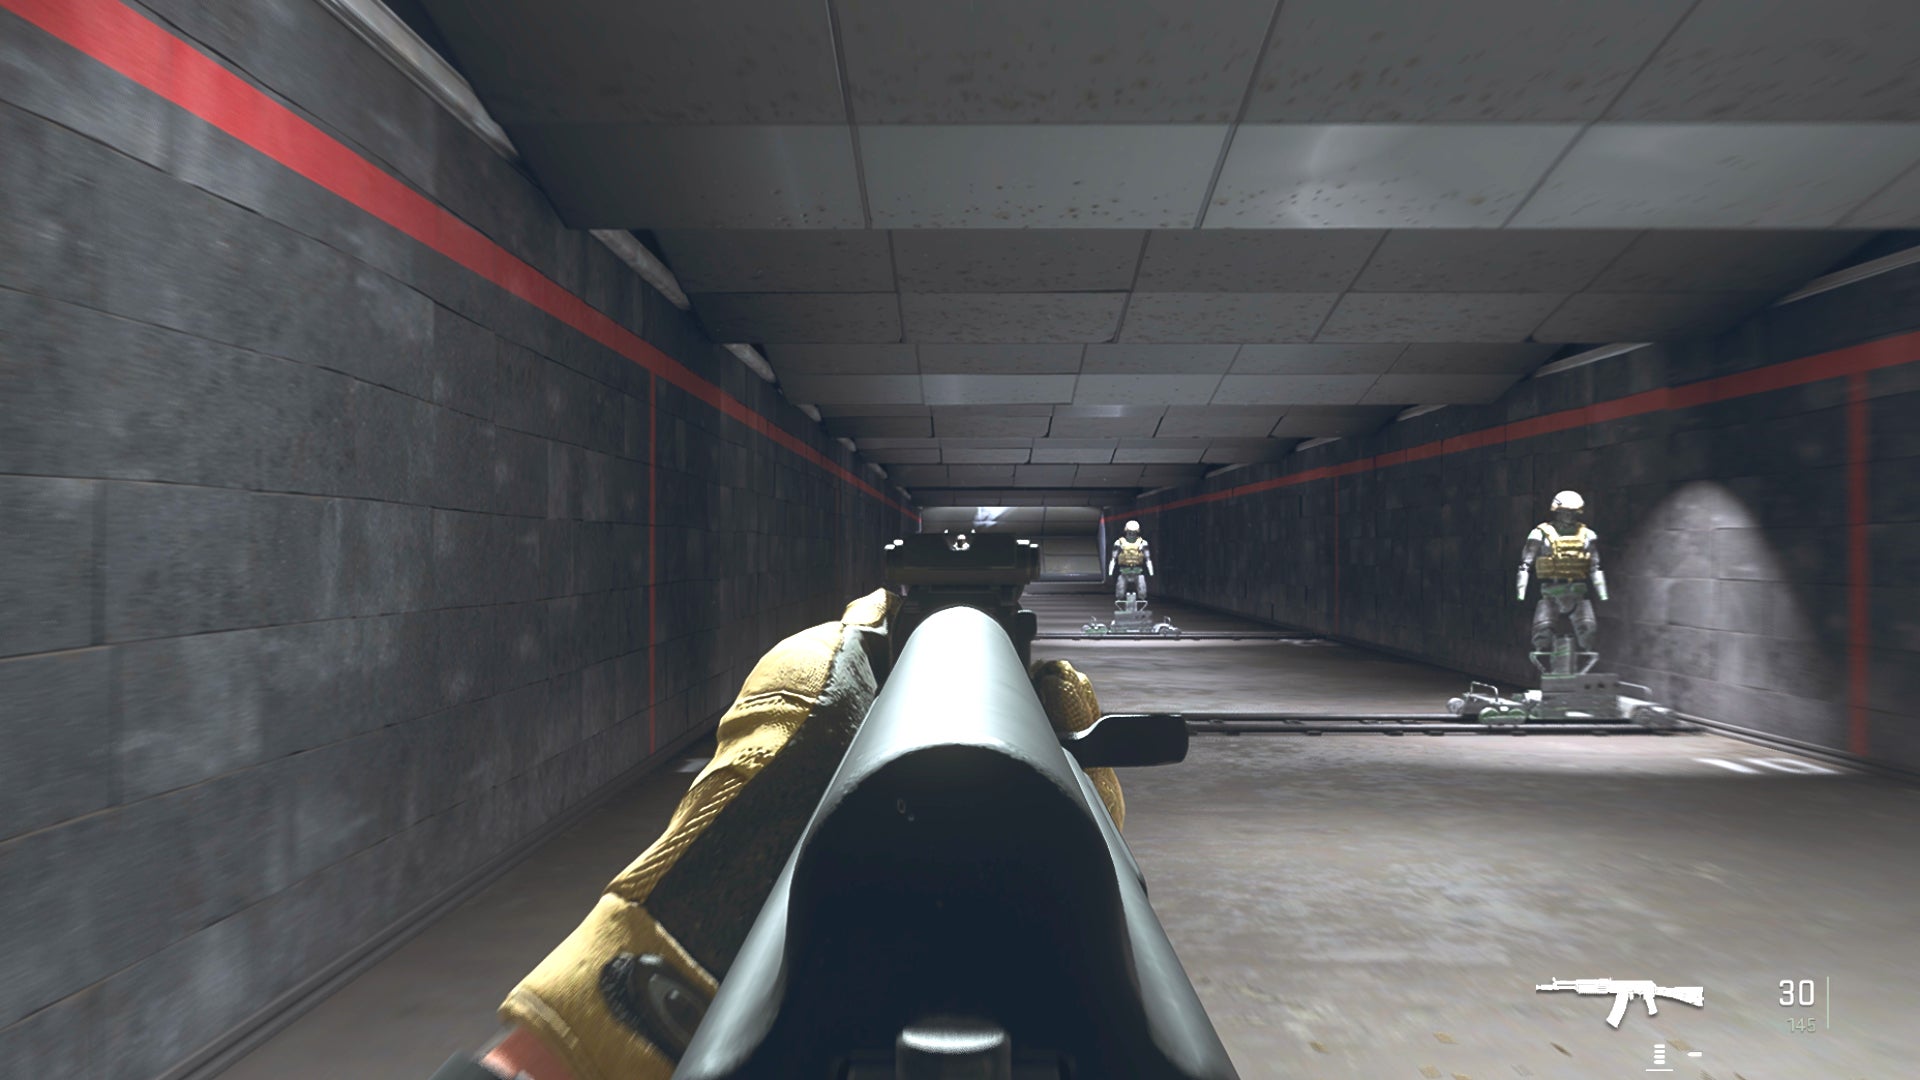 The player in Warzone 2.0 aims at a training dummy with the Kastov 545 ironsights.